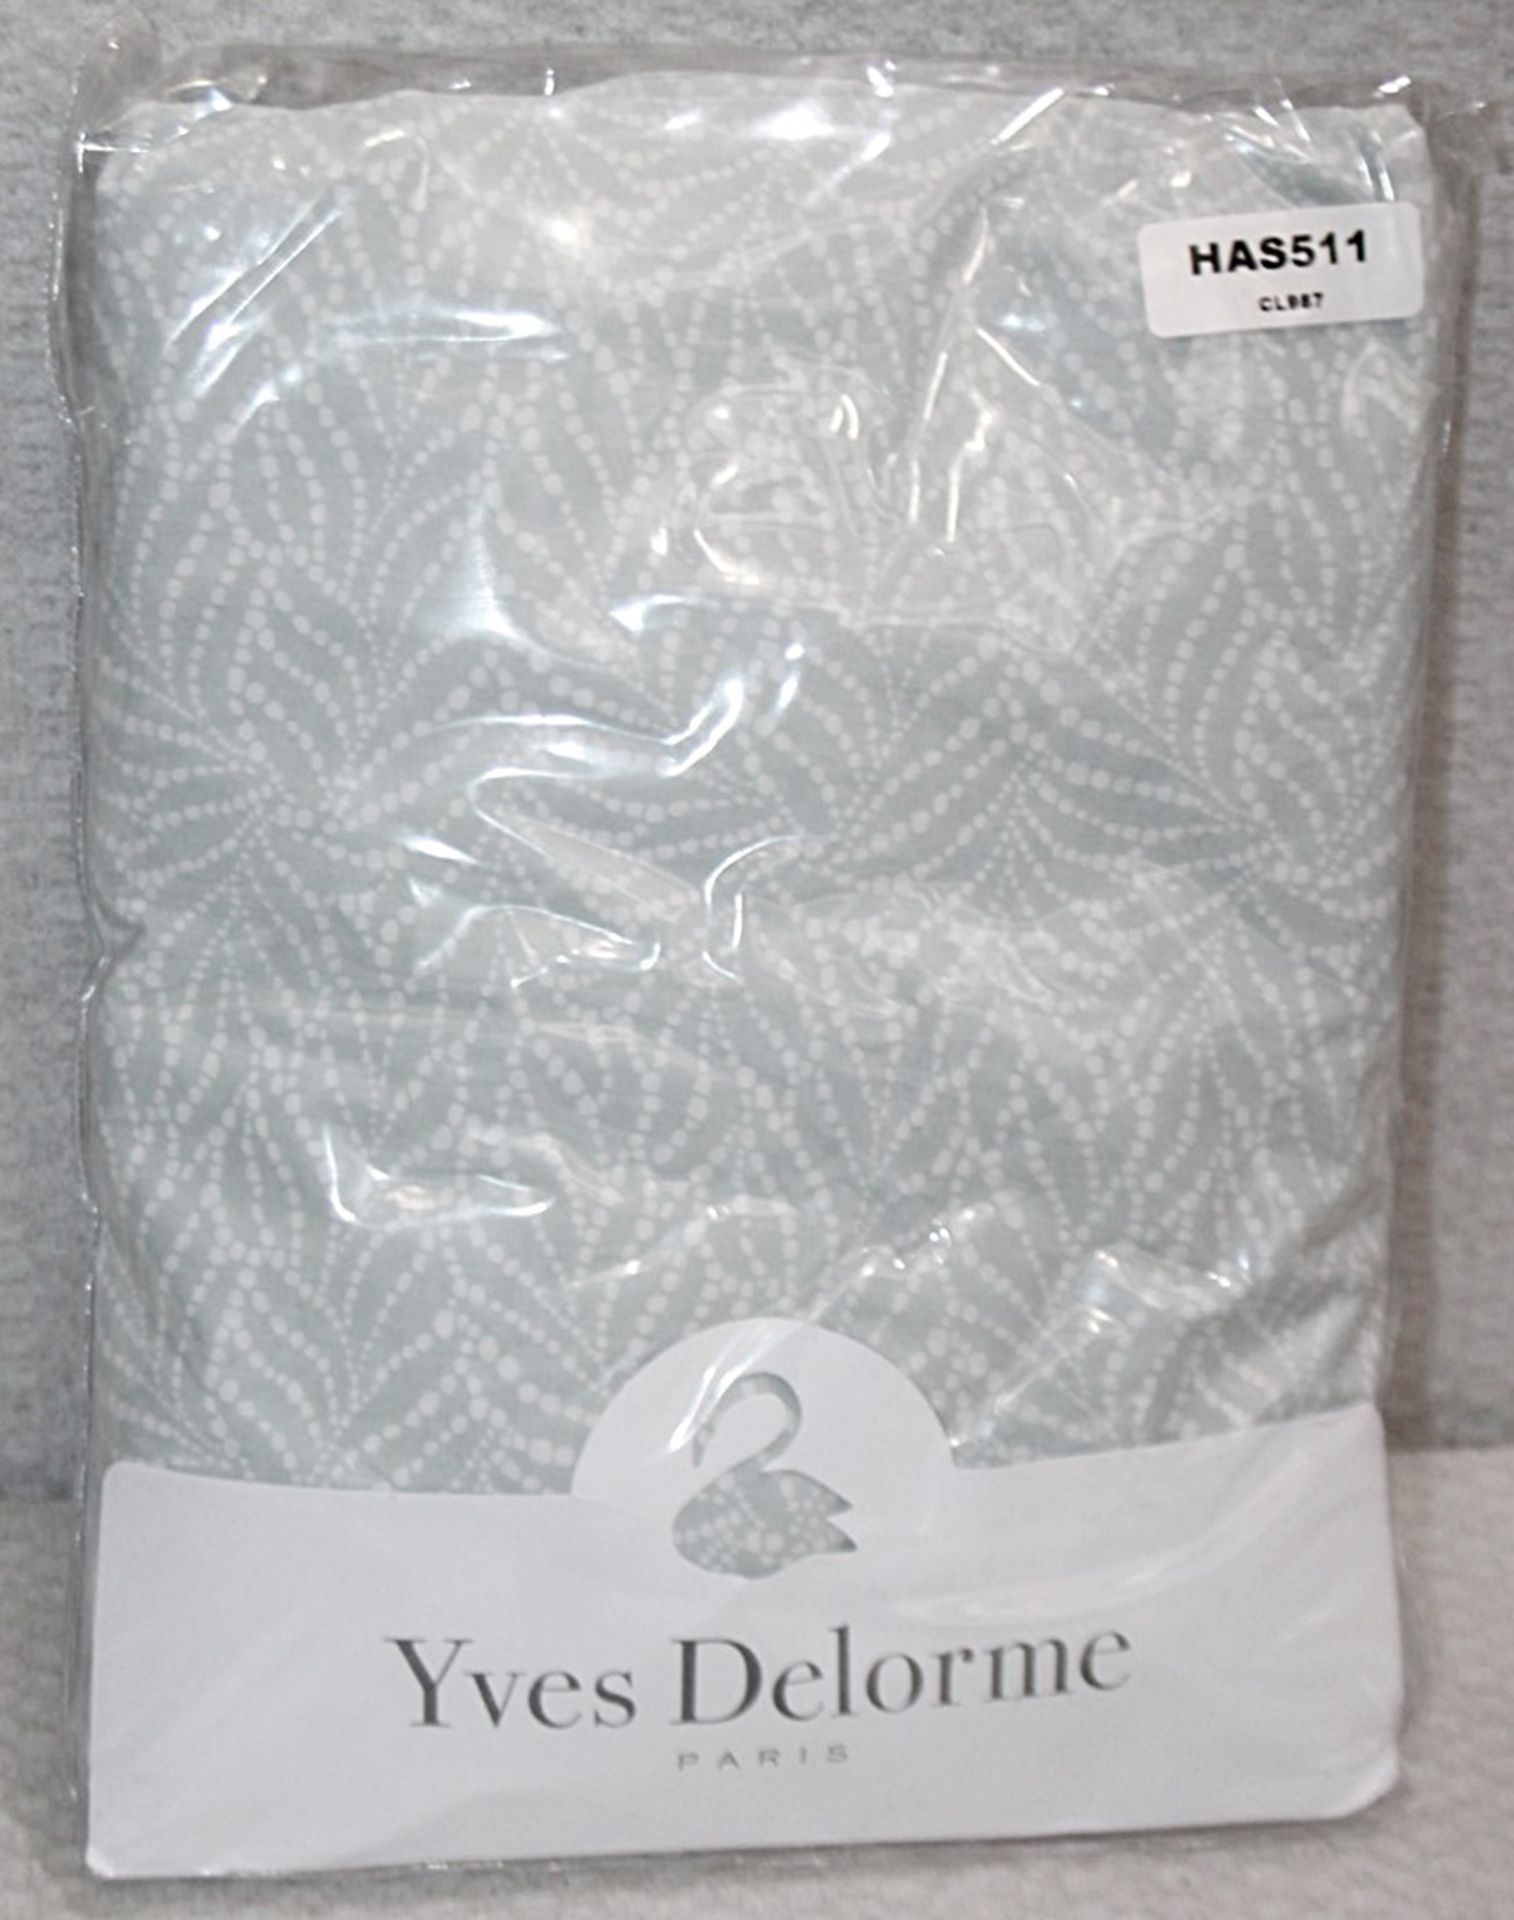 1 x YVES DELORME 'Caliopee' Single 100% Cotton Fitted Sheet (90cm x 190cm) - Unused Stock - Image 2 of 5